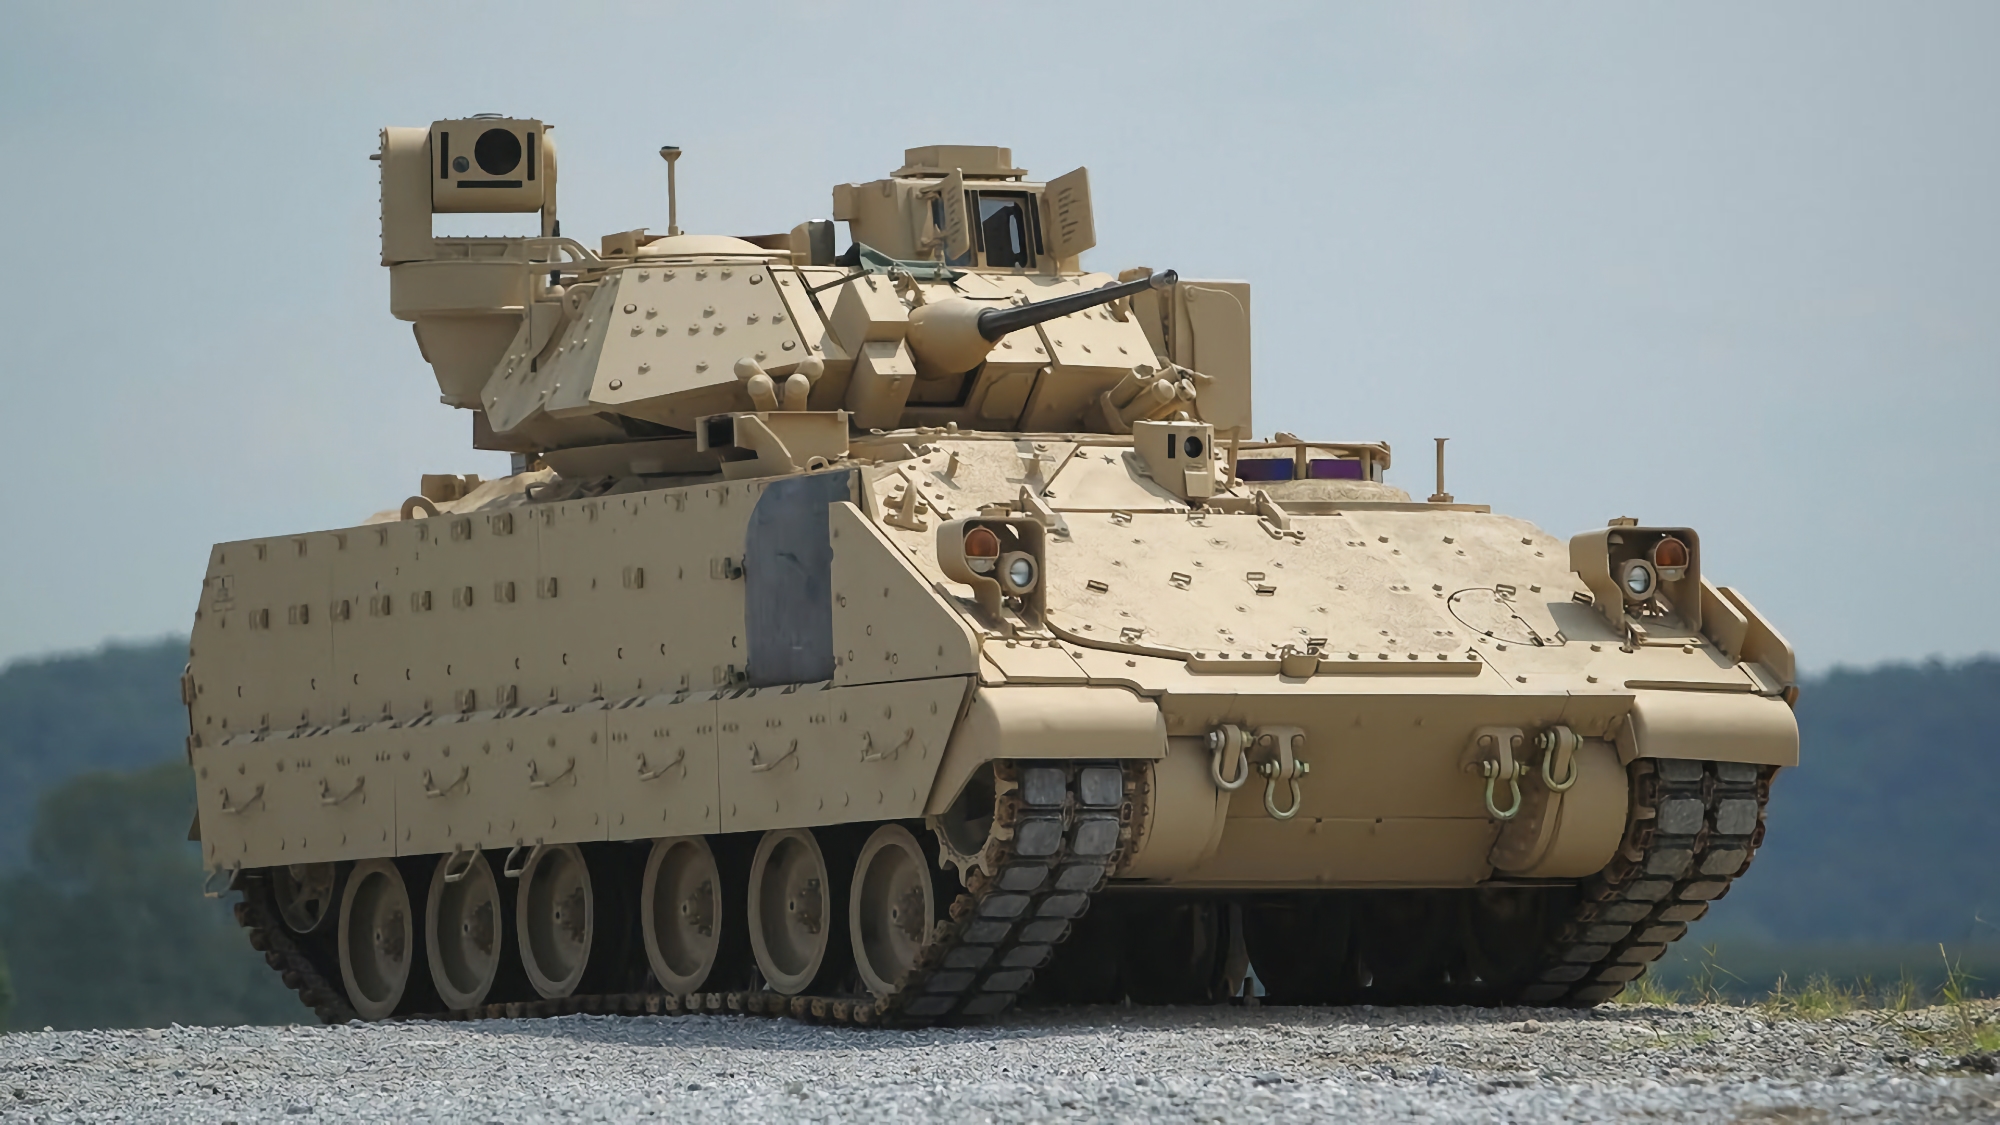 It's official: the U.S. will transfer M2 Bradley infantry fighting vehicles to Ukraine